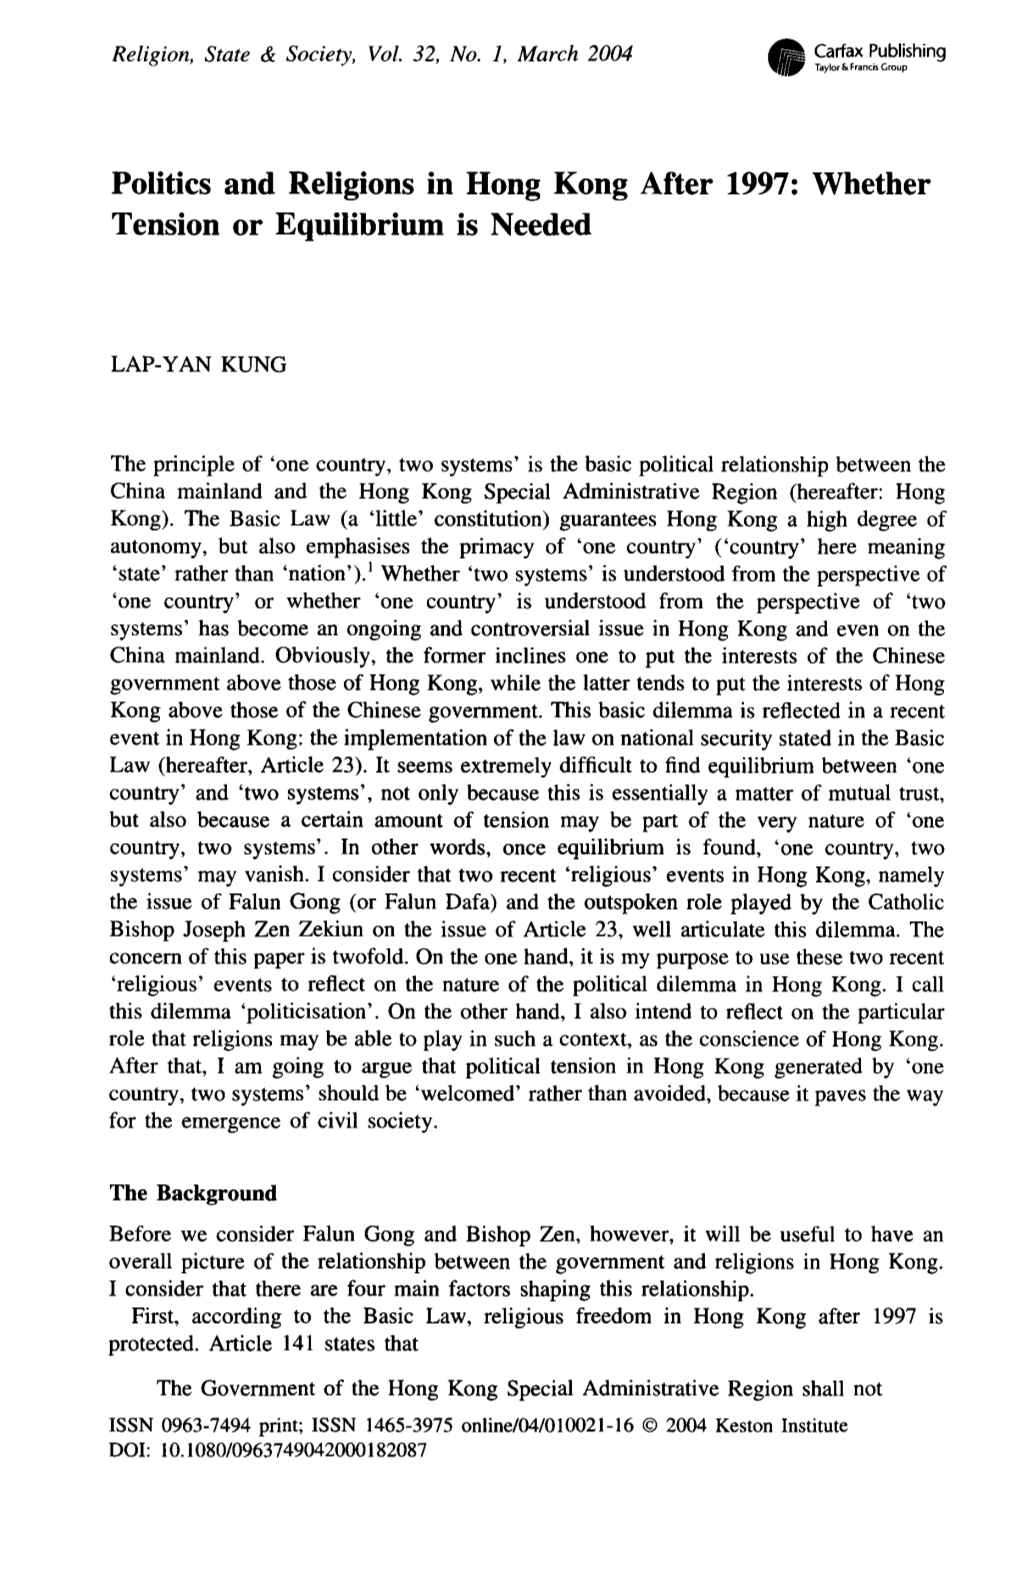 Politics and Religions in Hong Kong After 1997: Whether Tension Or Equilibrium Is Needed